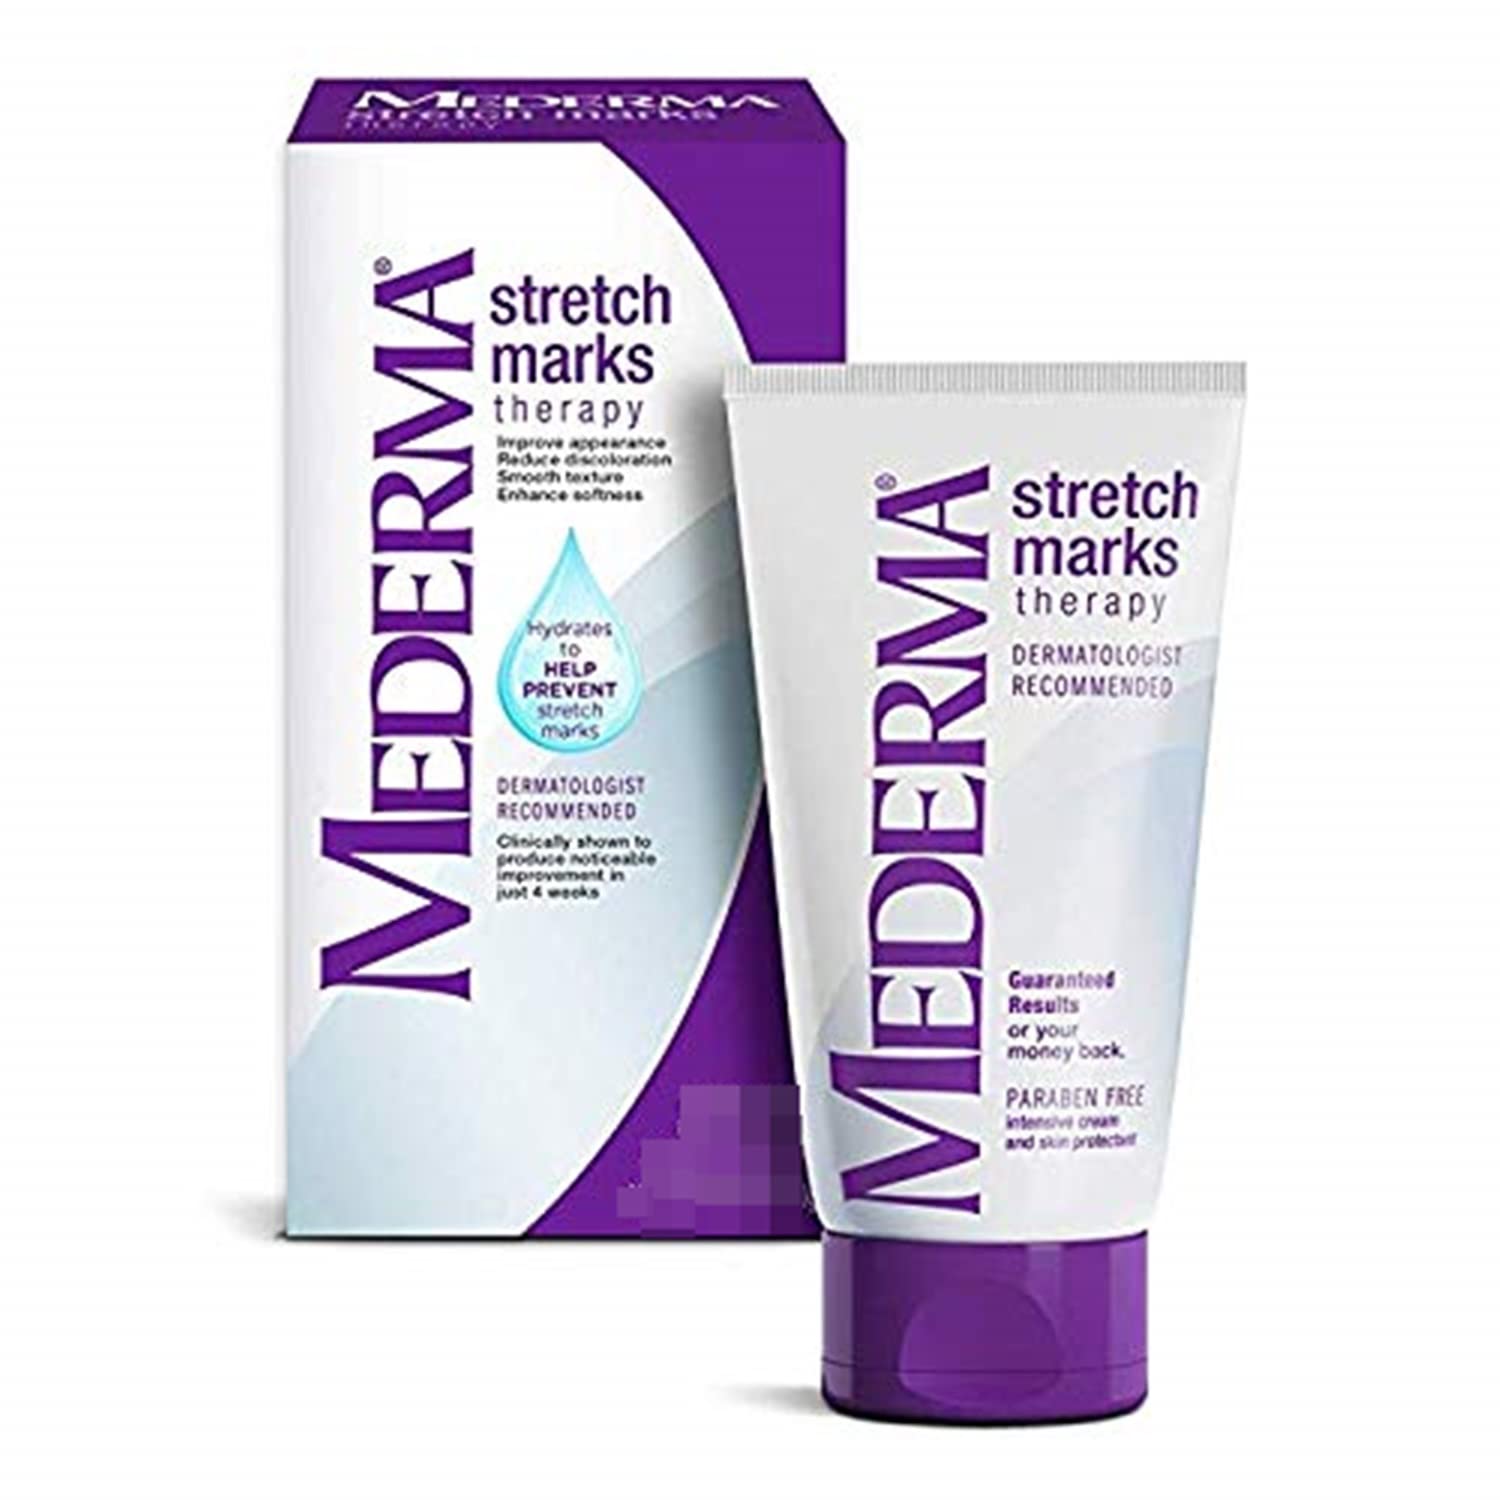 mederma stretch marks therapy ingredients mederma stretch marks therapy price mederma stretch marks therapy review